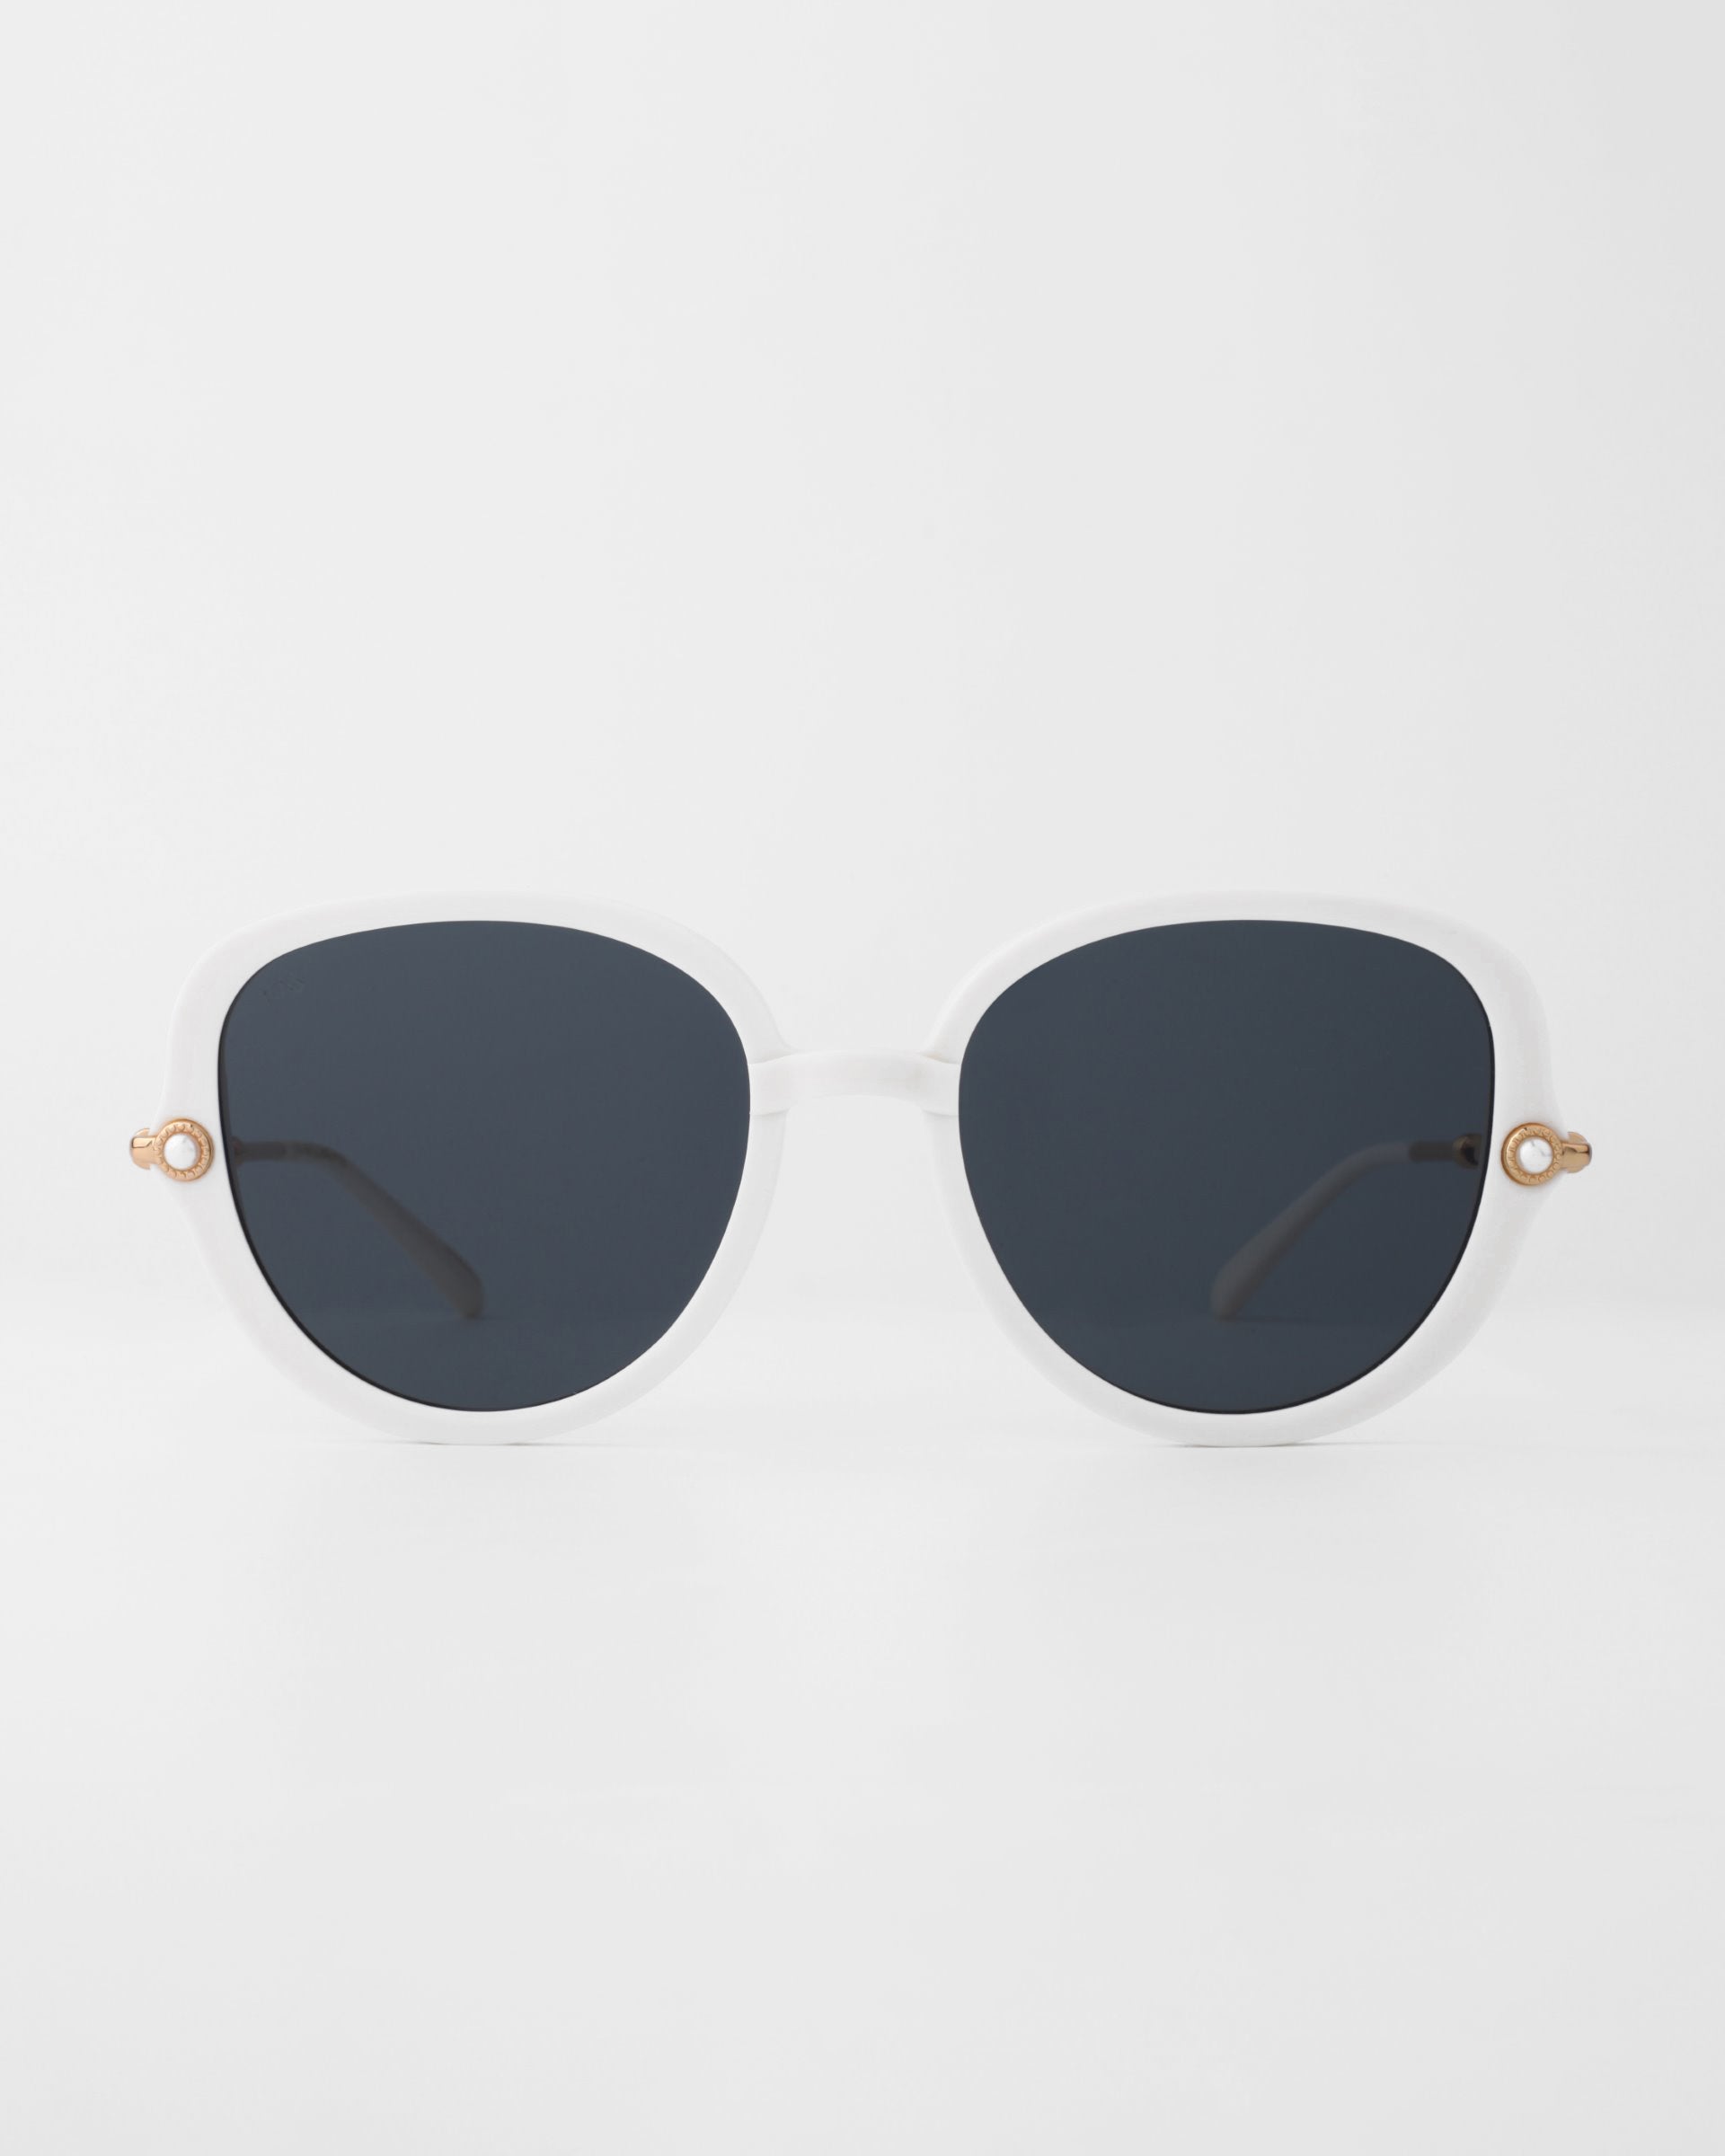 A pair of white-framed For Art&#39;s Sake® Primrose sunglasses with large, round dark lenses. Each temple is adorned with a small, handmade gold-plated decorative detail near the hinges. The glossy, smooth frame is made from plant-based acetate and the background is plain white.